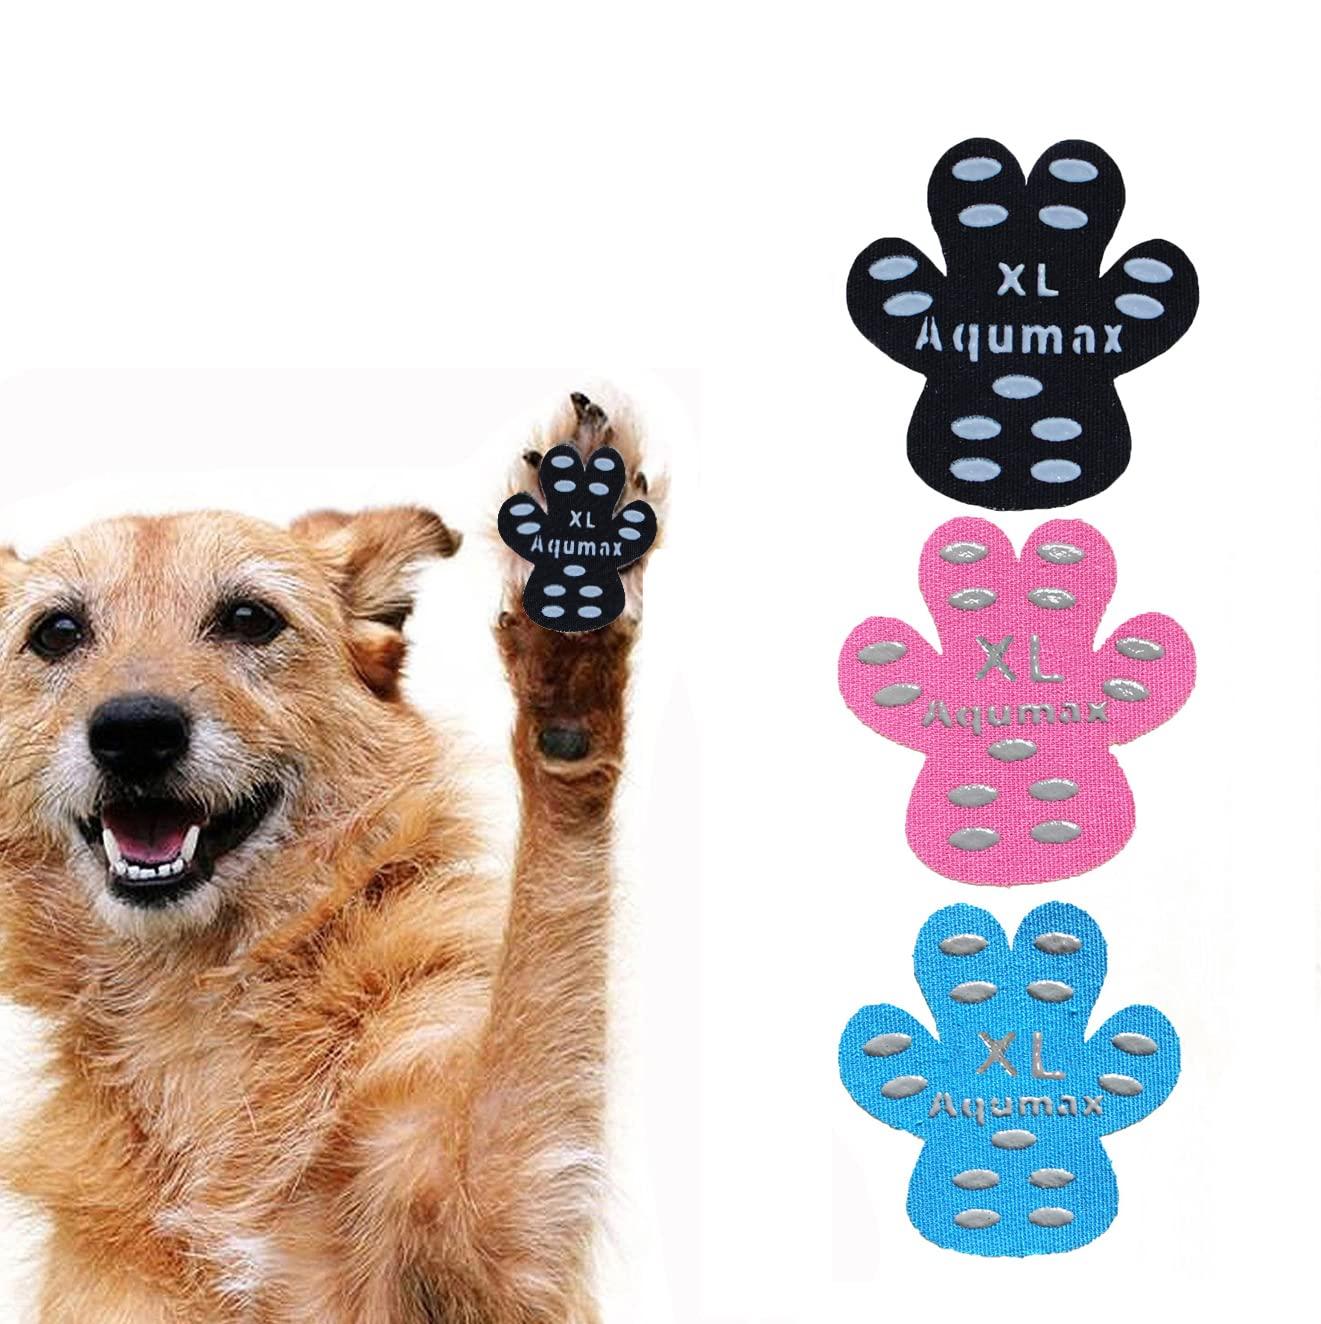 Aqumax Dog Anti Slip Paw Grips Traction Pads,Dog Feet Stickers With Stronger Adhesive,Paw Protection To Provide Traction For Slippery Floors,Essentials For Senior Dogs,12 Sets (48 Pcs) Xl Multicolor